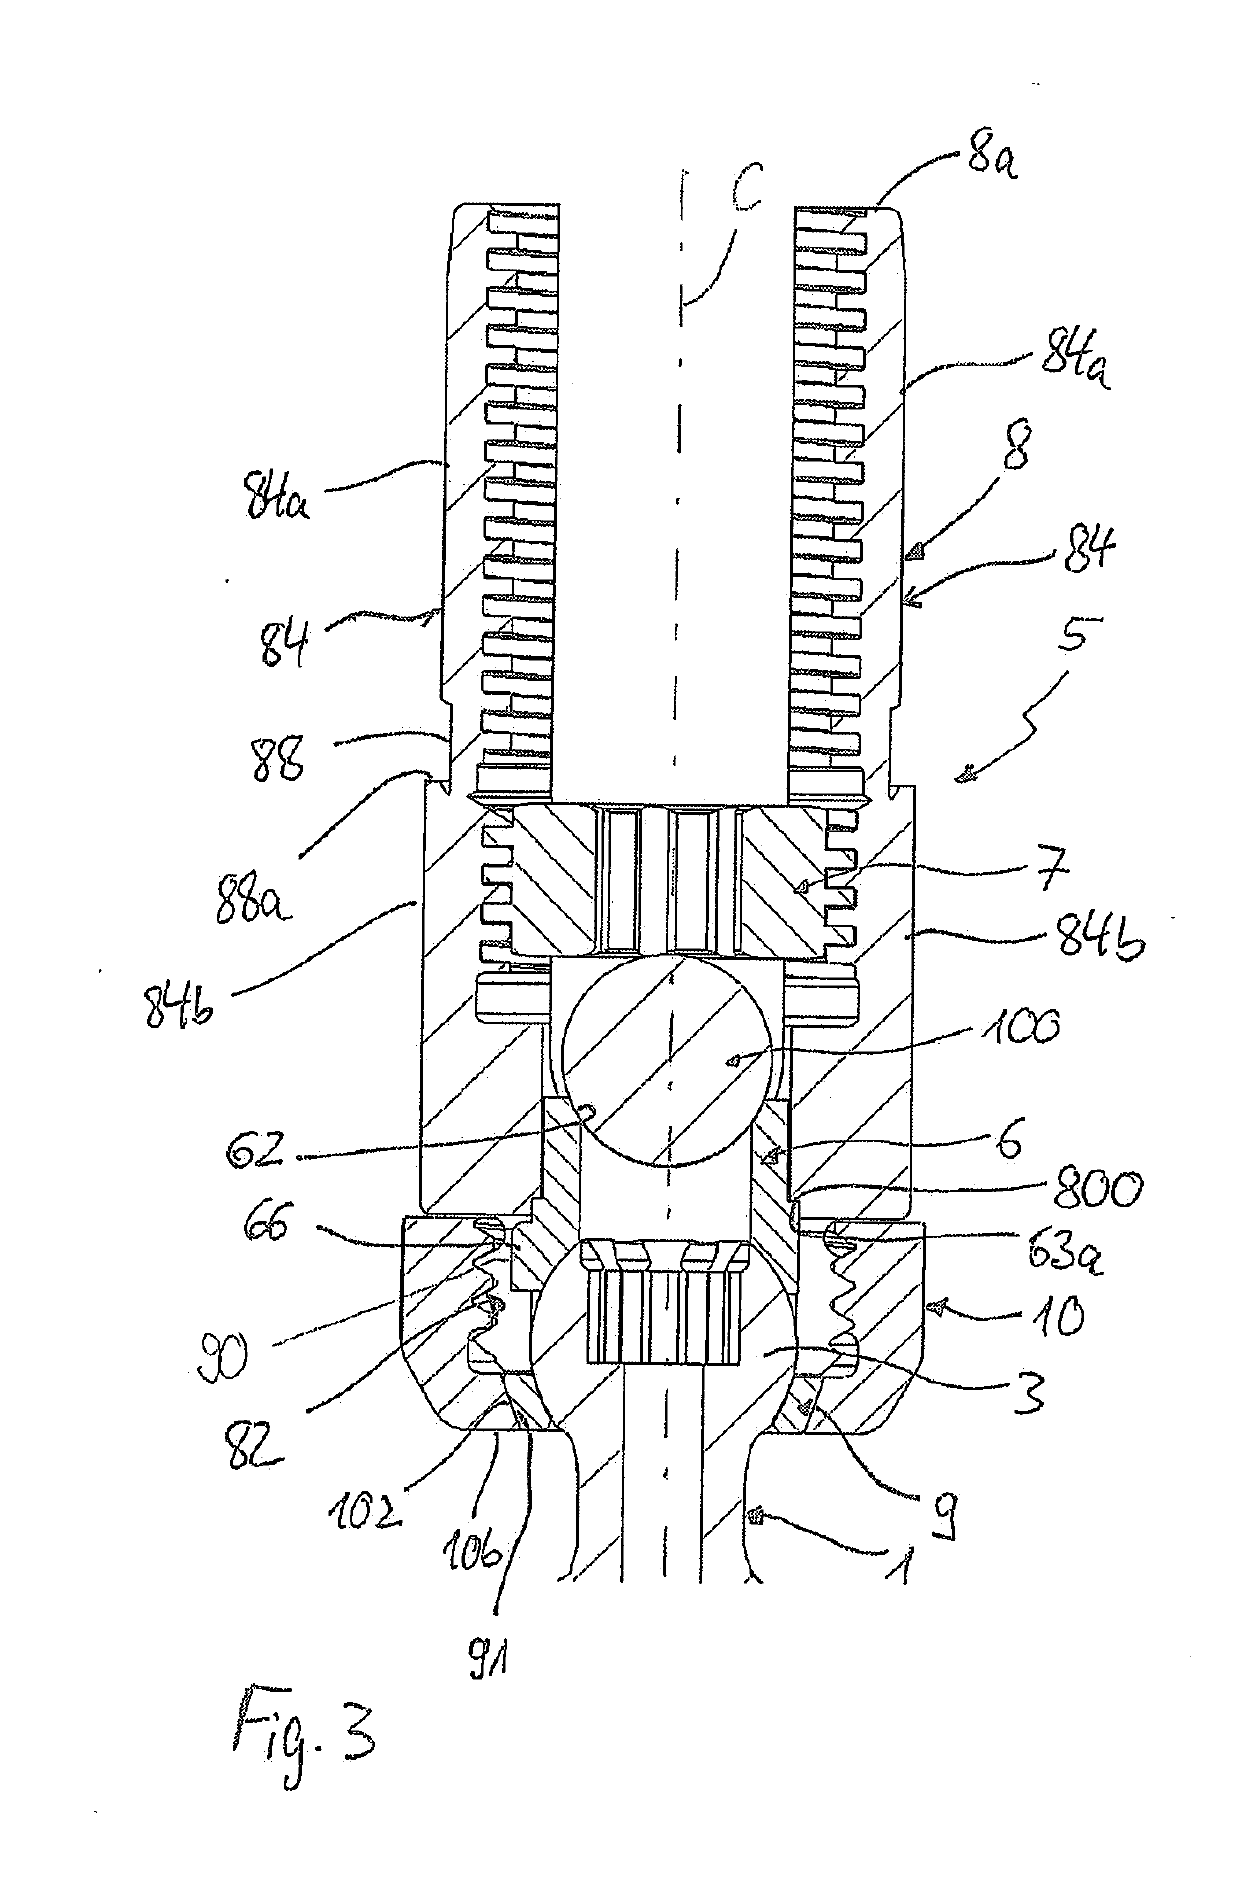 Polyaxial bone anchoring device and system including an instrument and a polyaxial bone anchoring device